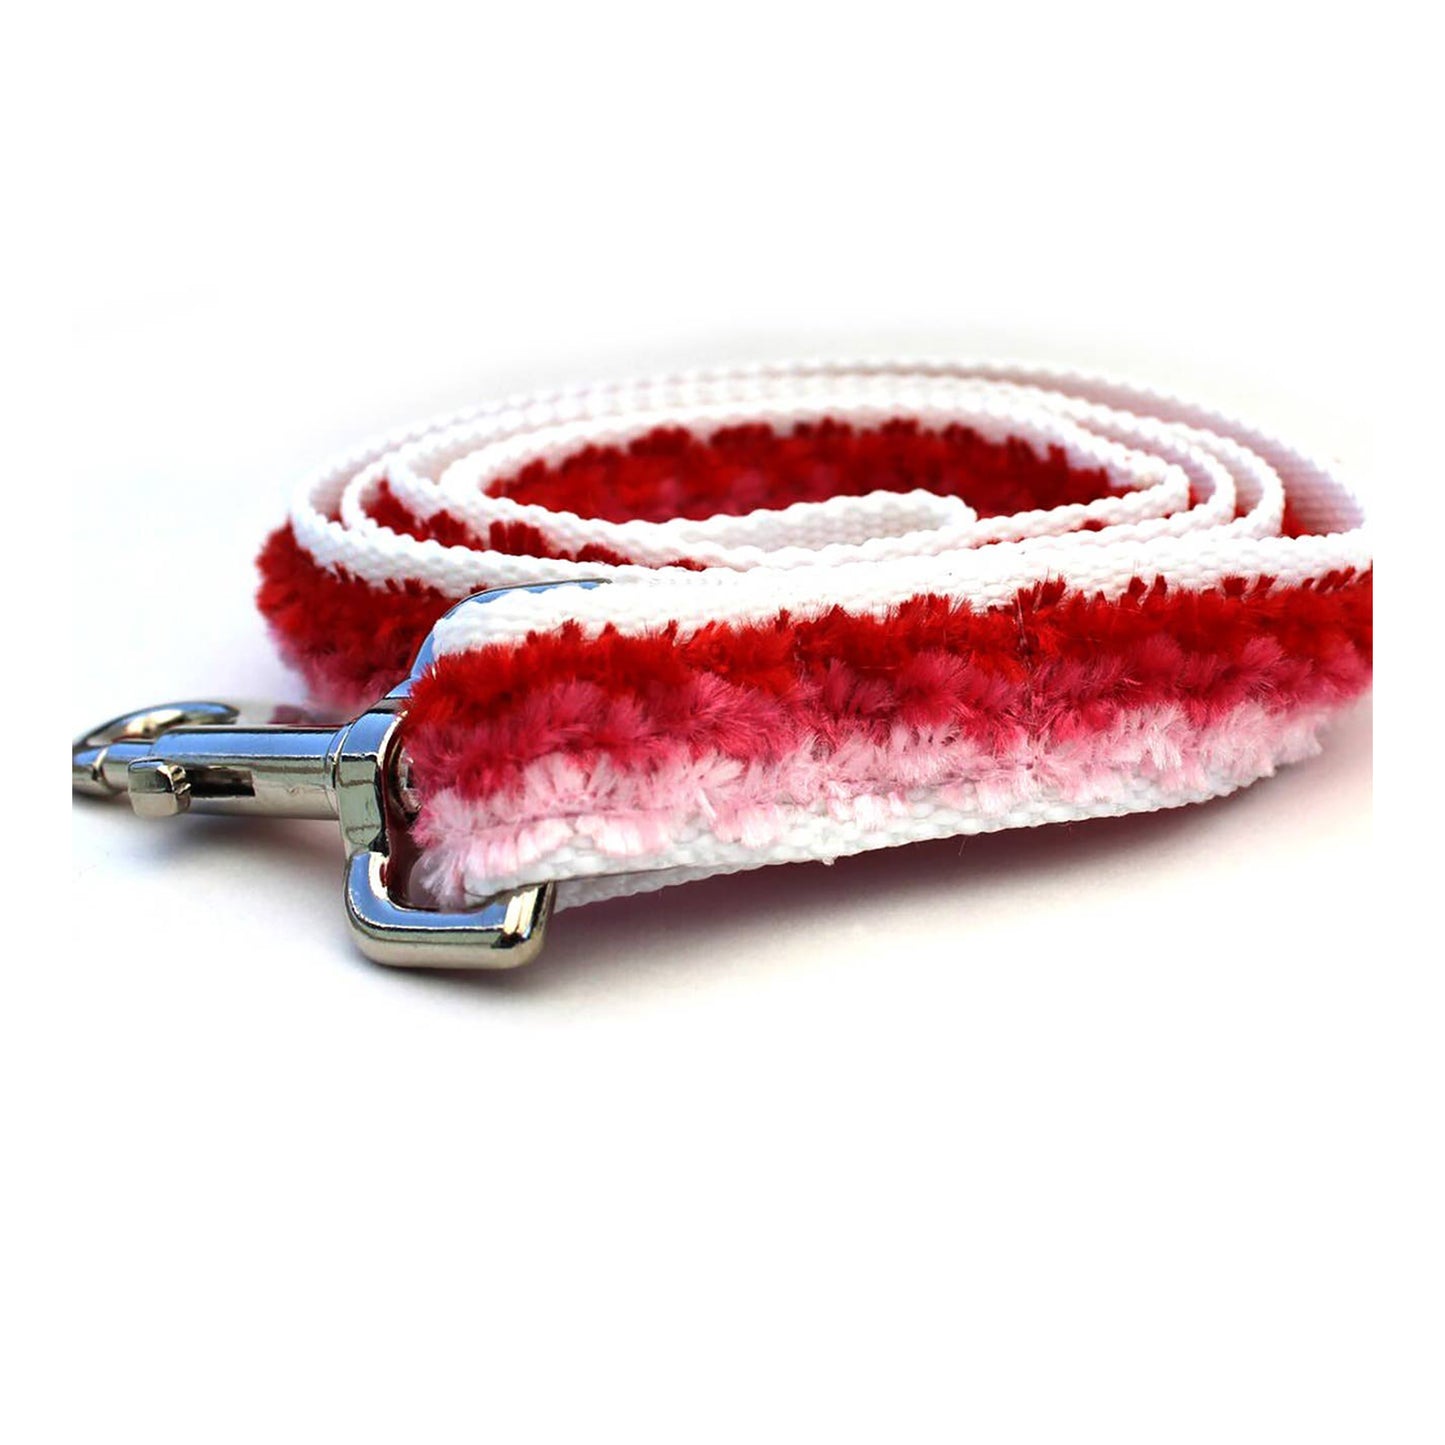 Cabo Cotton Candy Pink Dog Leash